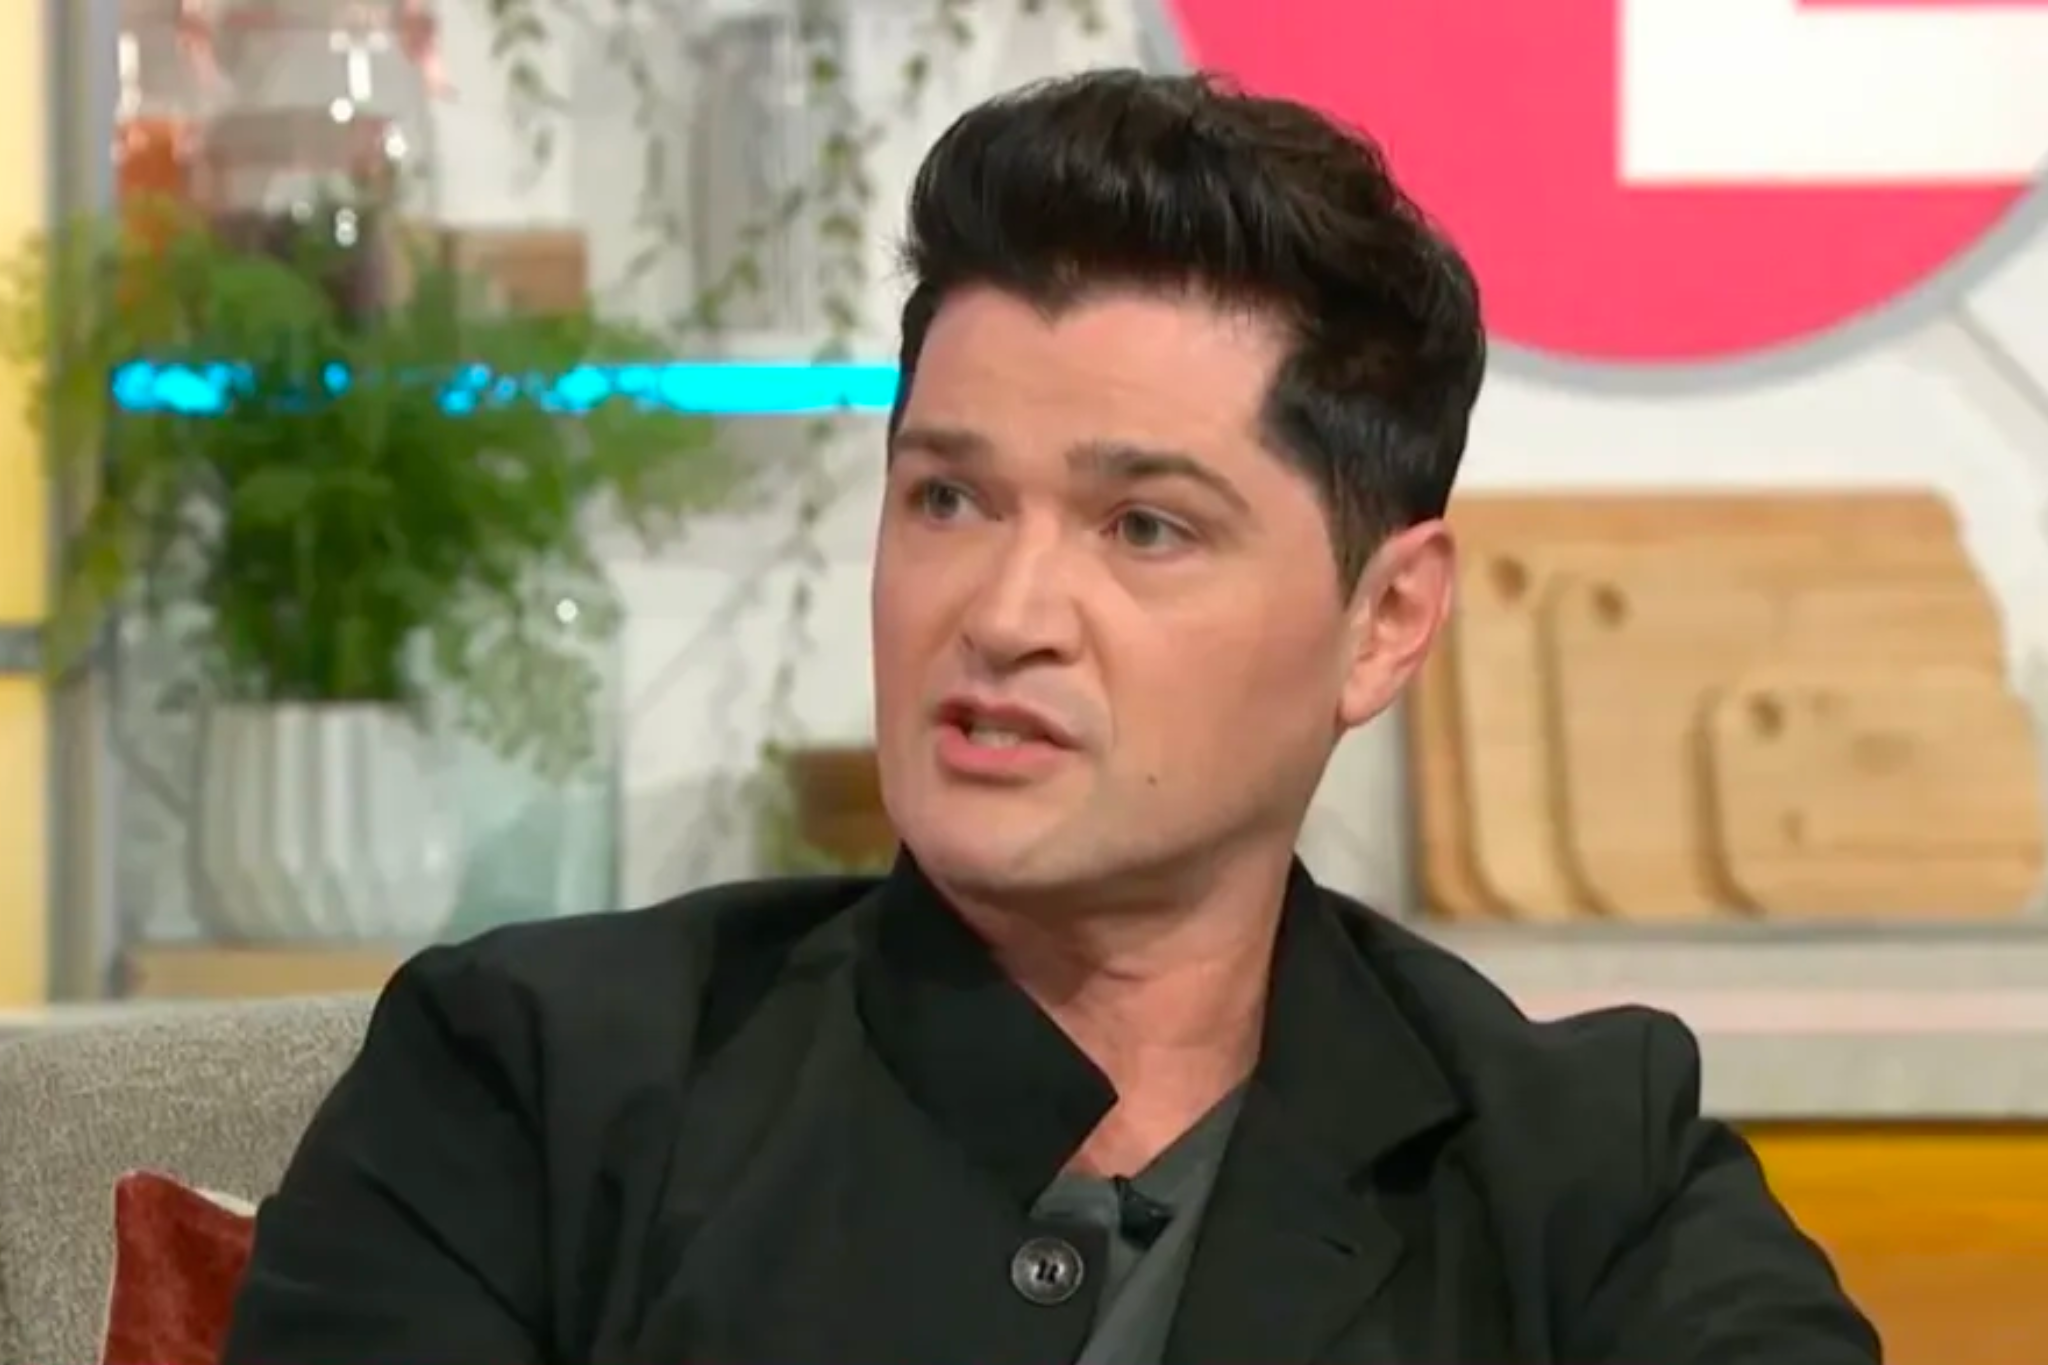 this script, lorraine, tour, the script’s danny o’donoghue says he went ‘off the rails’ after his bandmate mark died